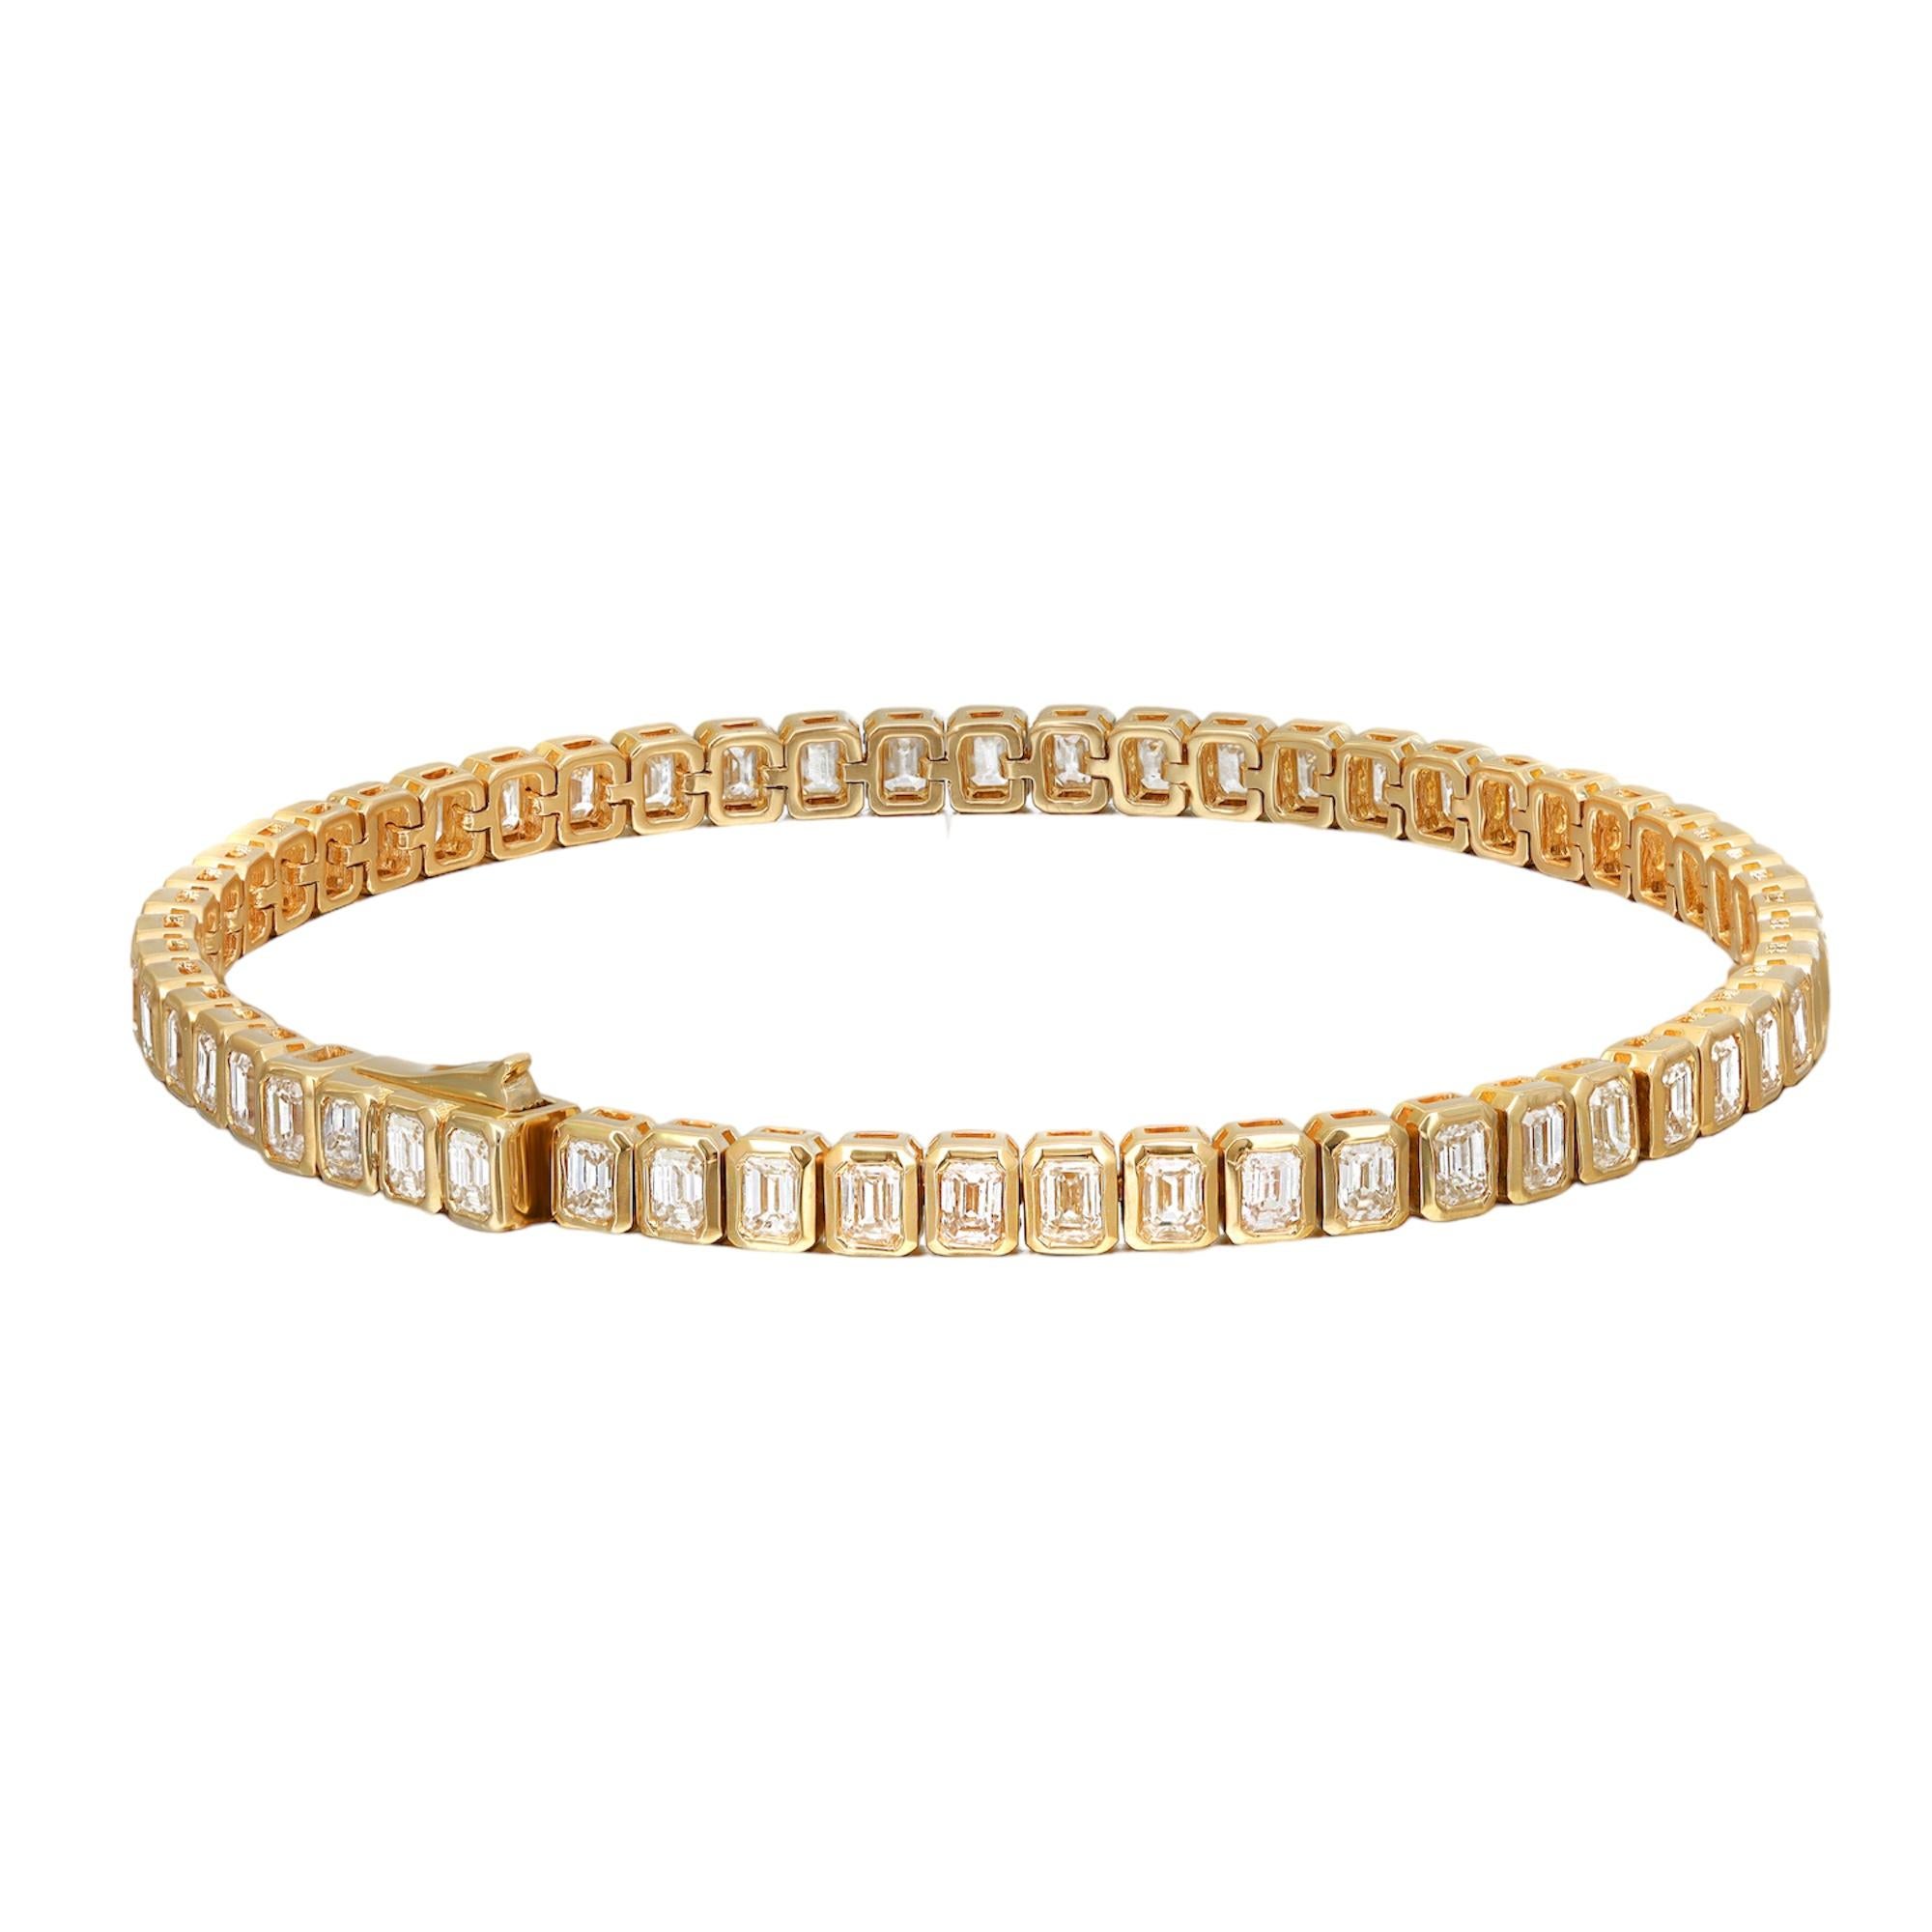 Step into an era of timeless charm with our 4.84-carat emerald diamond tennis bracelet, embraced by the warmth of 18K yellow gold. Picture the effortless fusion of sophistication and vibrancy as emerald-cut diamonds, totaling 4.84 carats, dance